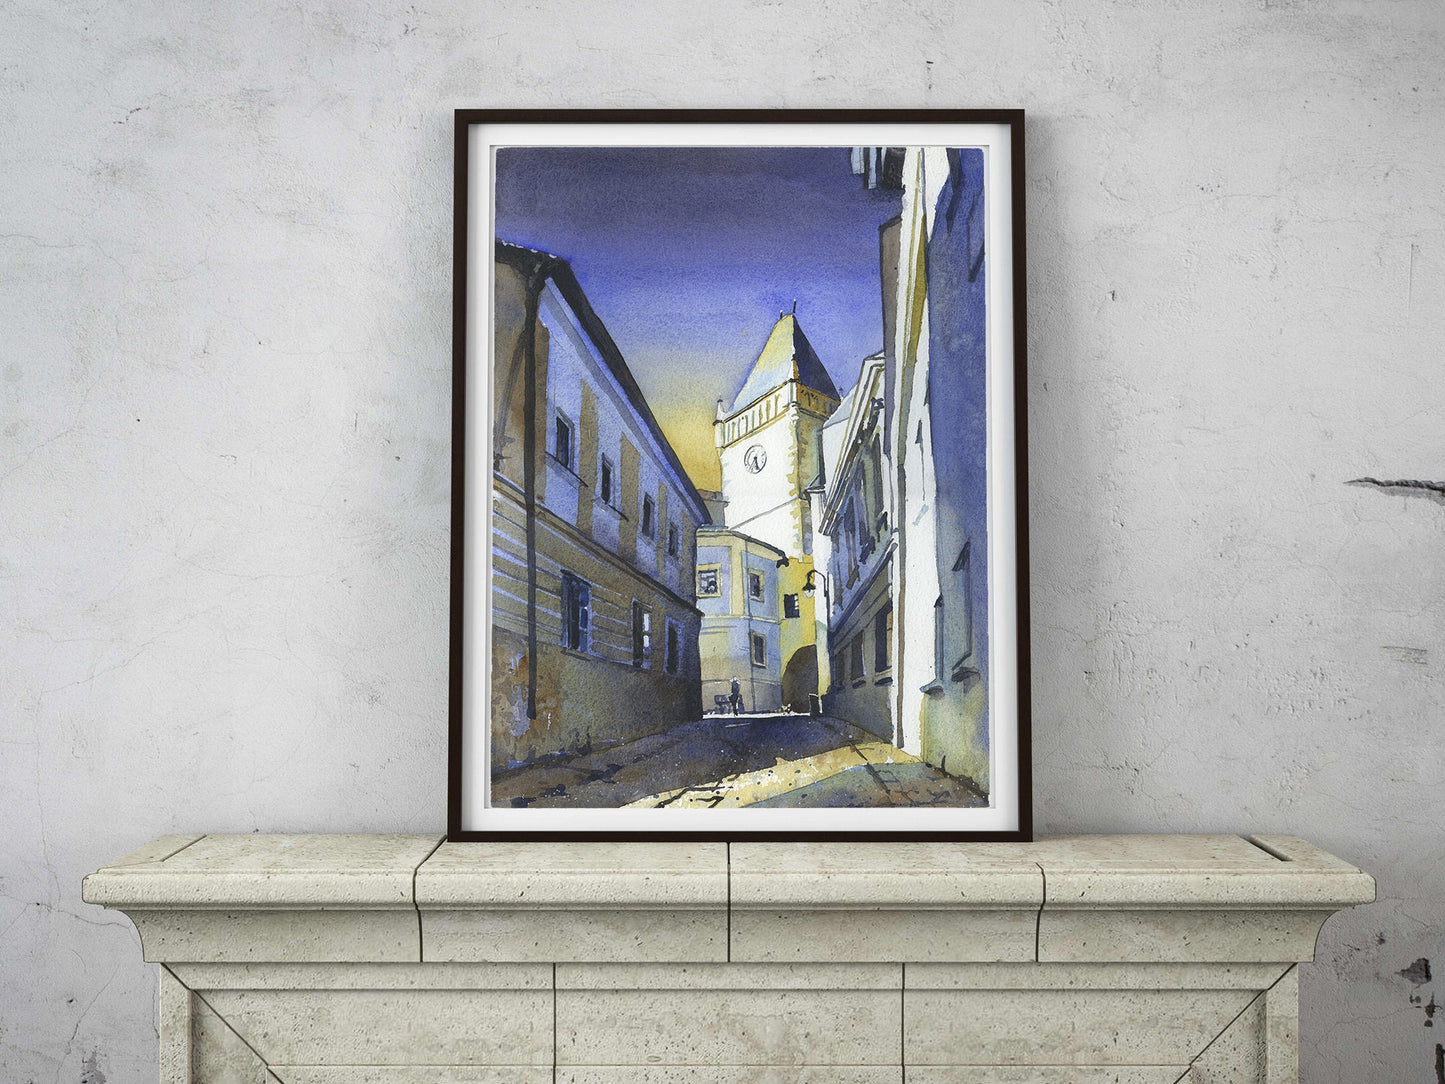 Tabor, Czech Republich belltower.  Watercolor painting of belltower in medieval village of Tabor skyline fine art watercolor painting print